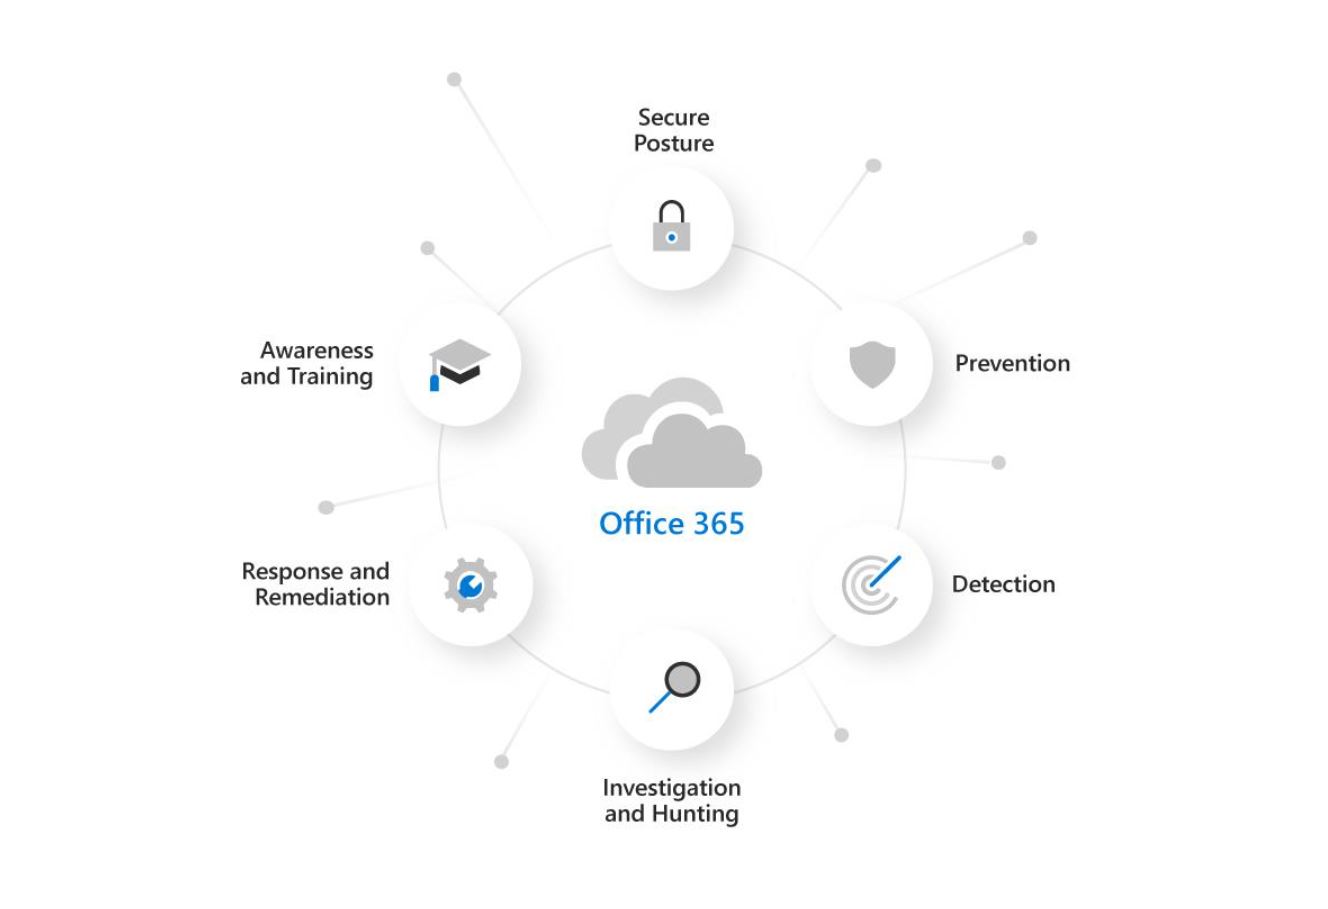 Infographic showing the five elements of Office 365: Secure posture, prevention, detection, investigation and hunting, response and remediation, awareness and training